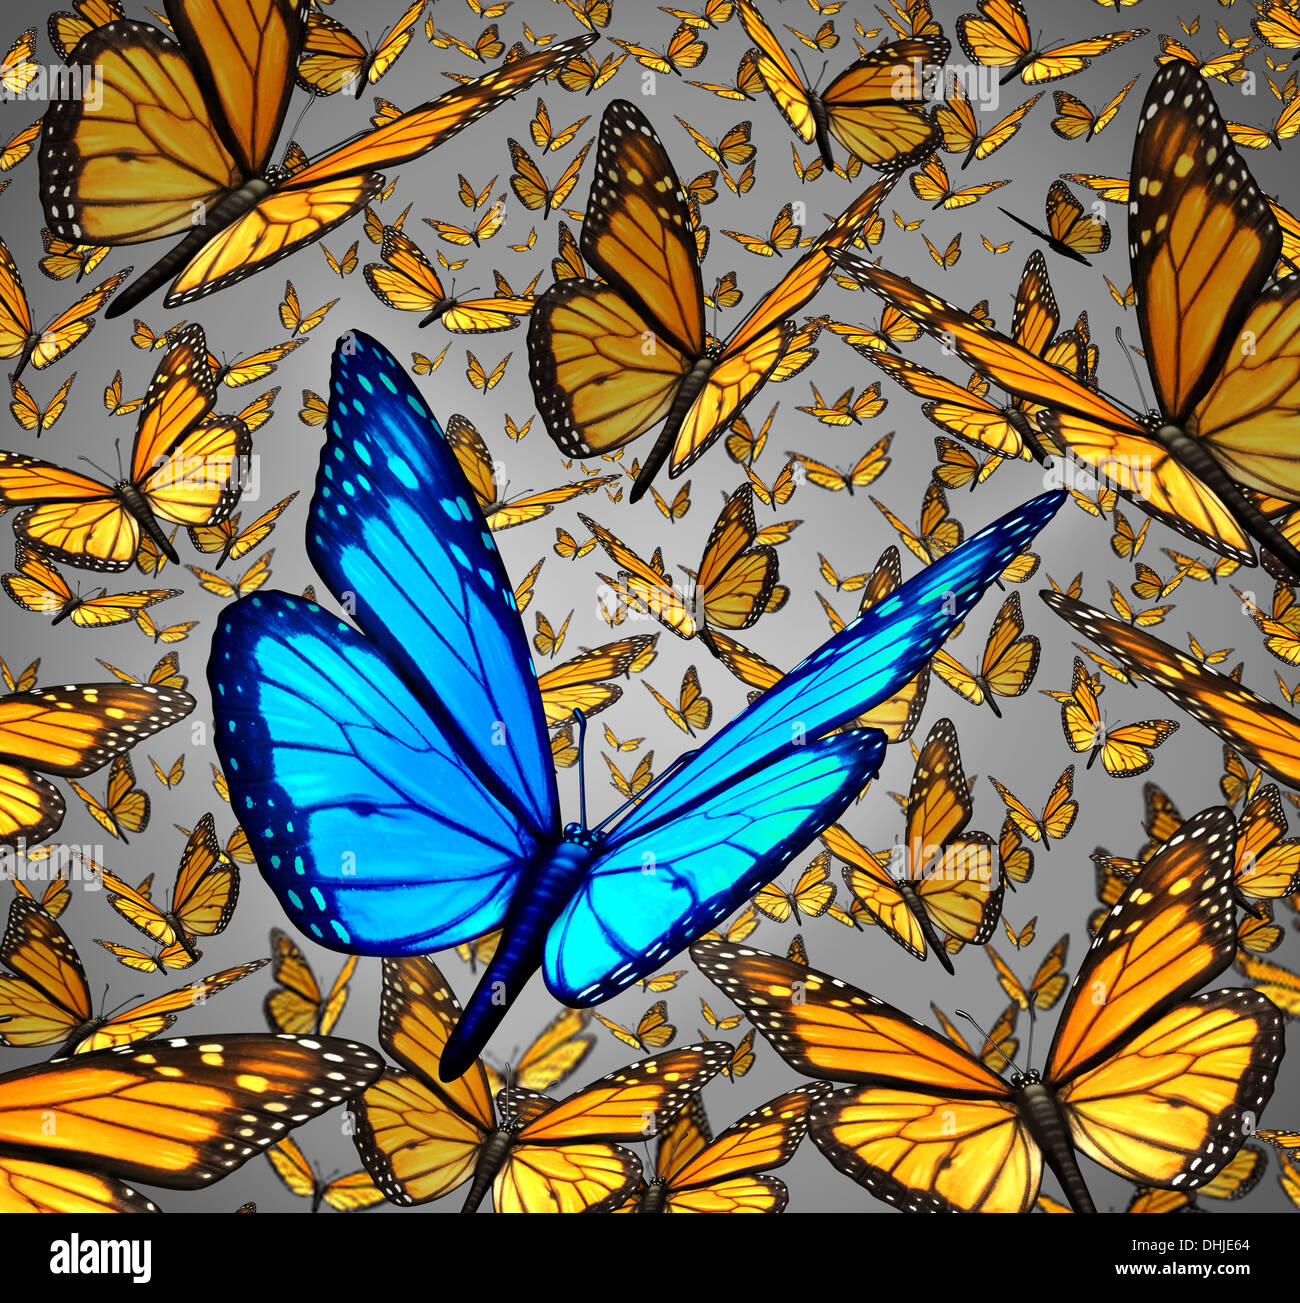 New vision standing out from the crowd business concept as a symbol of individuality and innovative thinking as a group of Monarch butterflies flying with a single special insect colored blue as an icon of creativity. Stock Photo